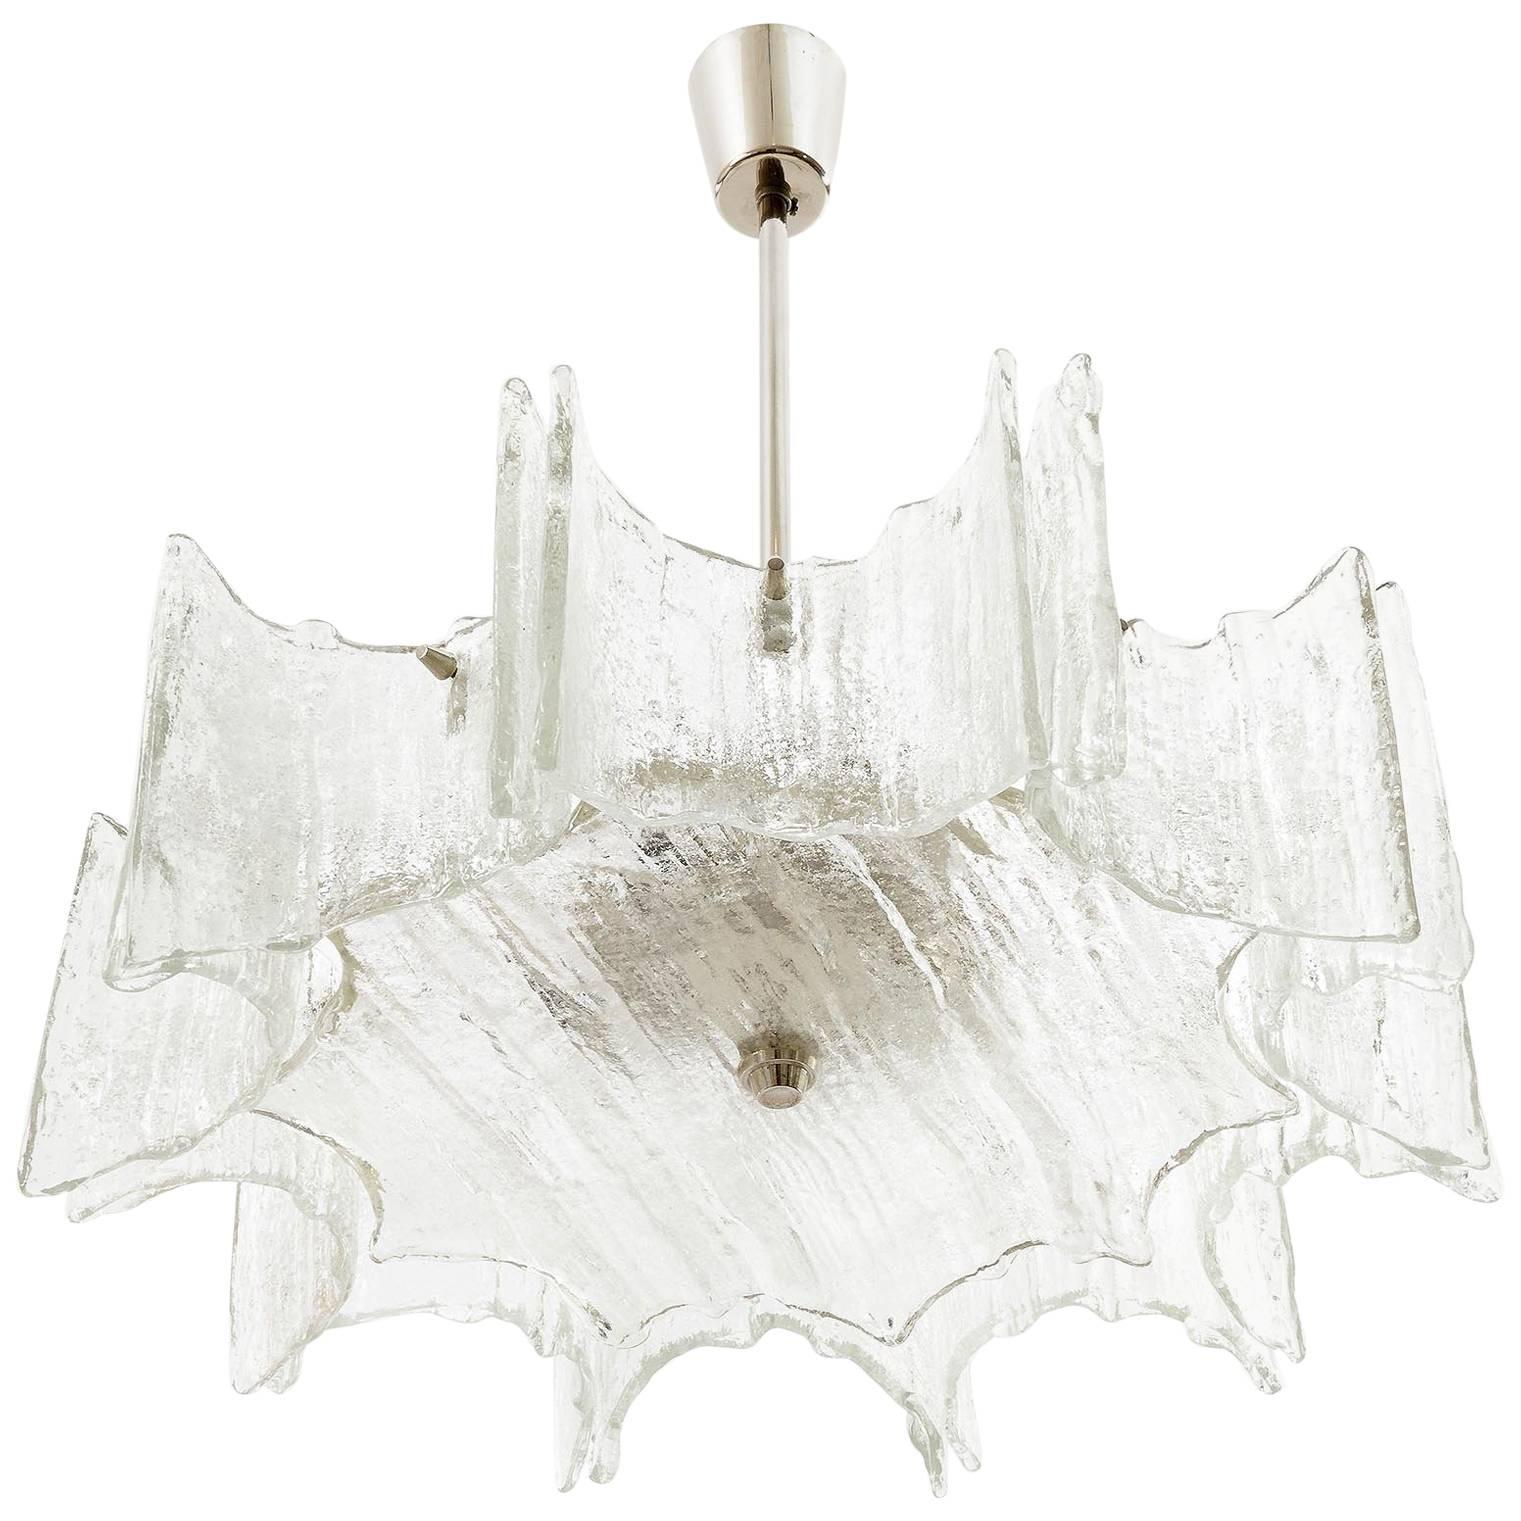 A star-shaped ceiling light by Kalmar manufactured in Austria in Mid-Century, circa 1970 (late 1960s or early 1970s). 
It can be used as chandelier or as flush mount light. We can provide a flush mounting fixture for free. 
The lamp is made of